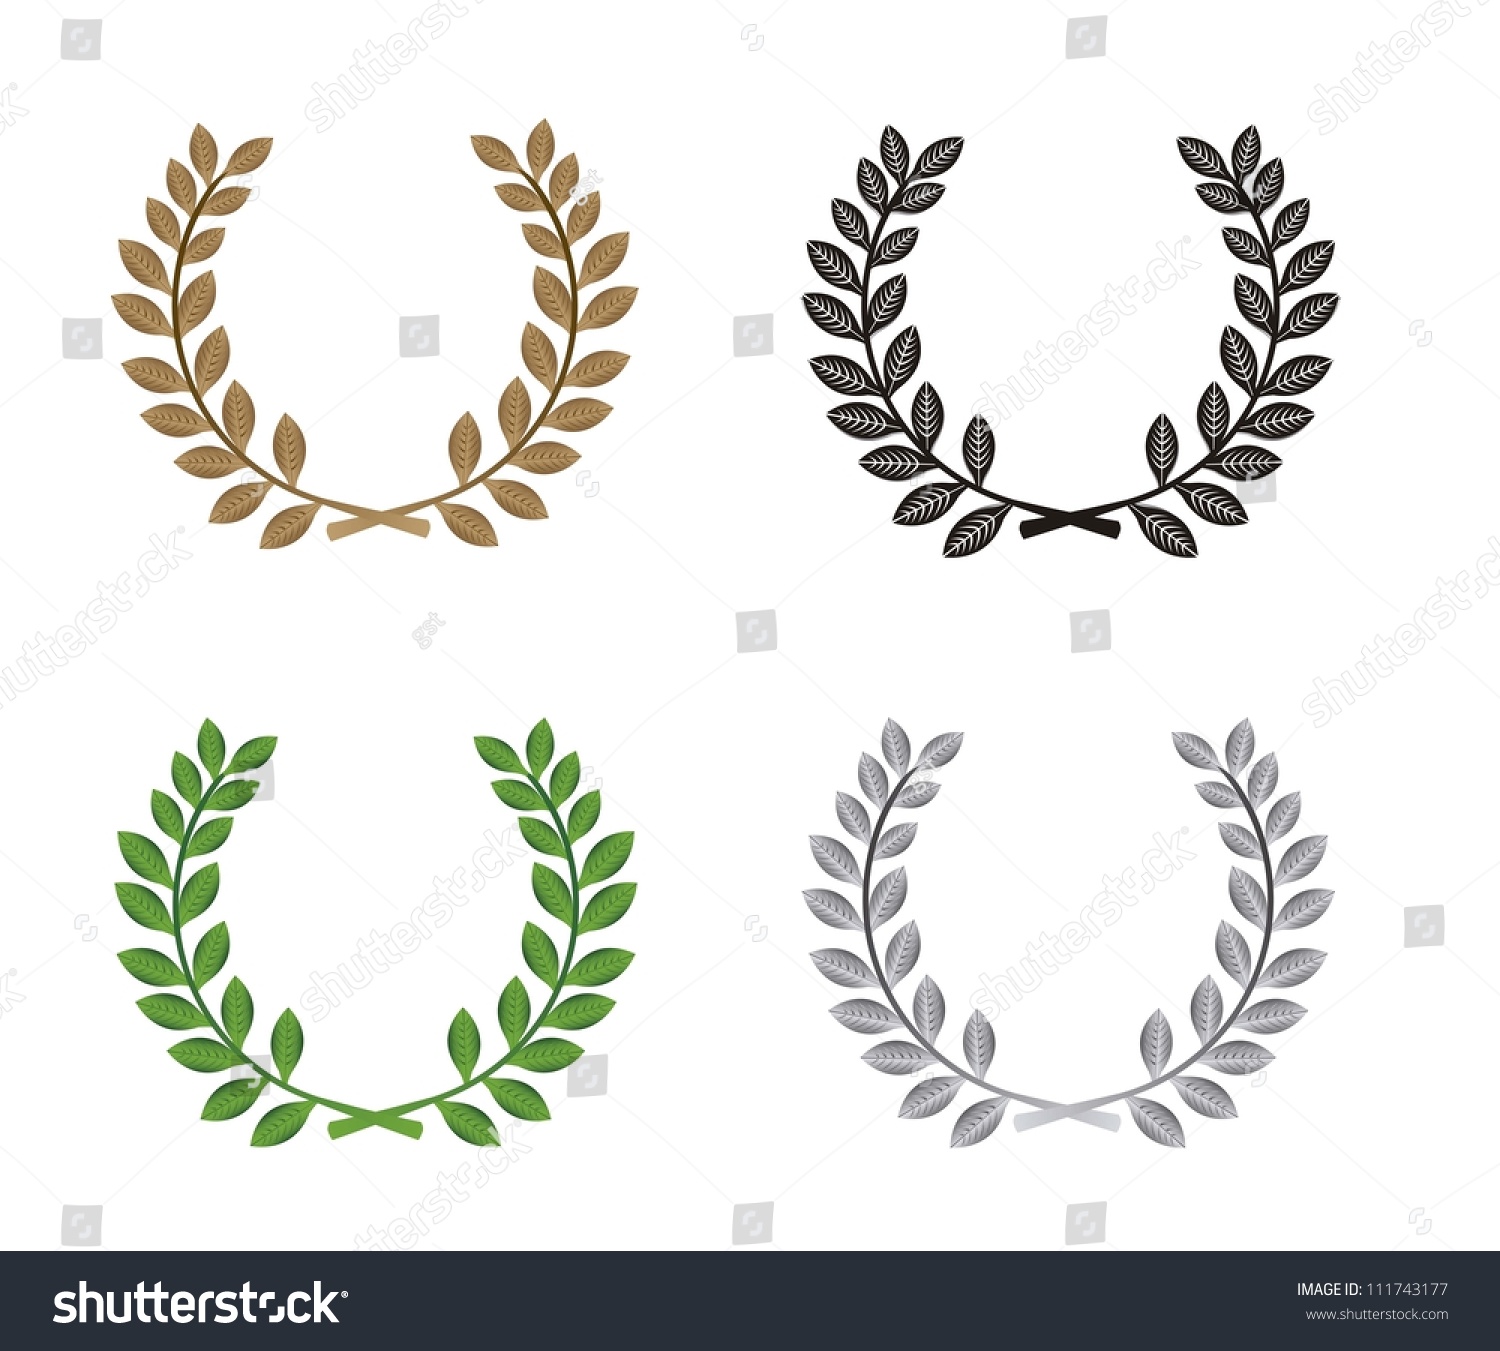 Laurel Wreath Isolated Over White Background. Vector Illustration